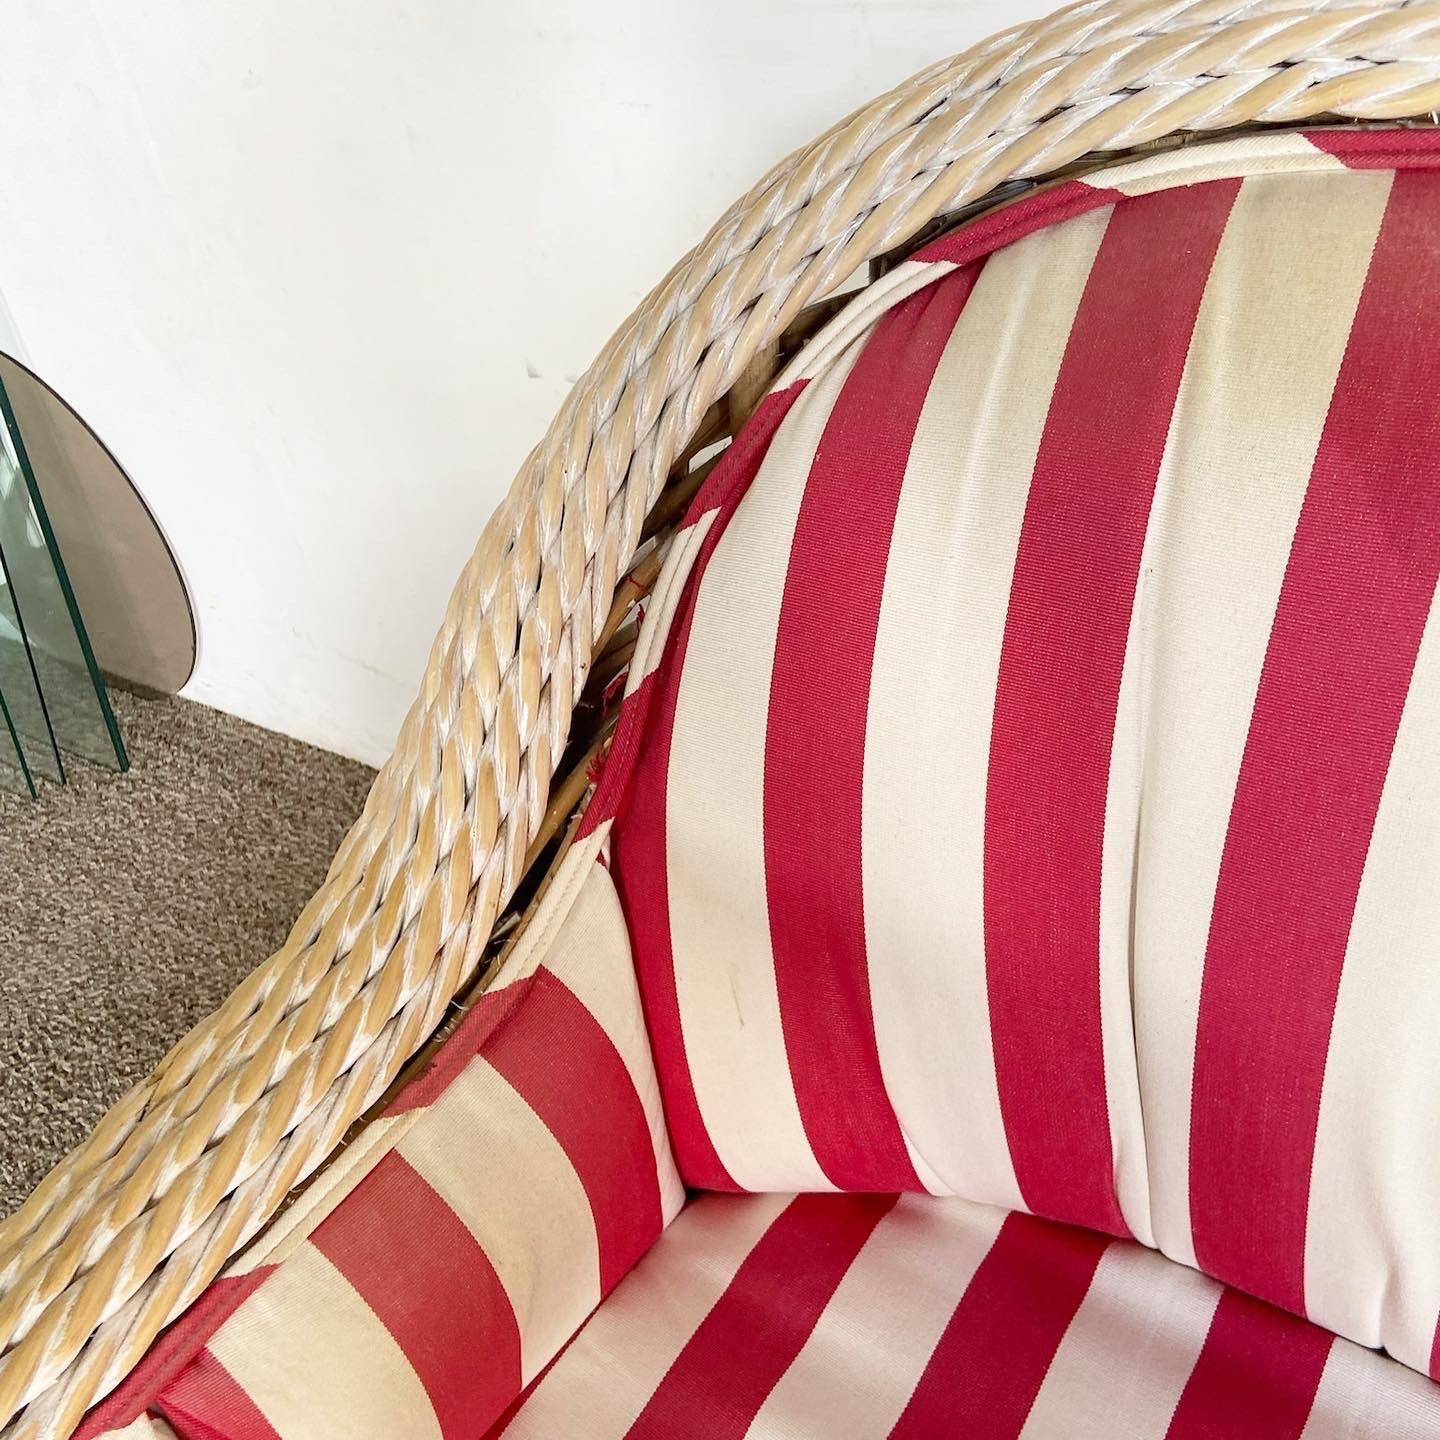 Boho Chic Woven Wicker Bulbous Lounge Chairs - a Pair For Sale 2